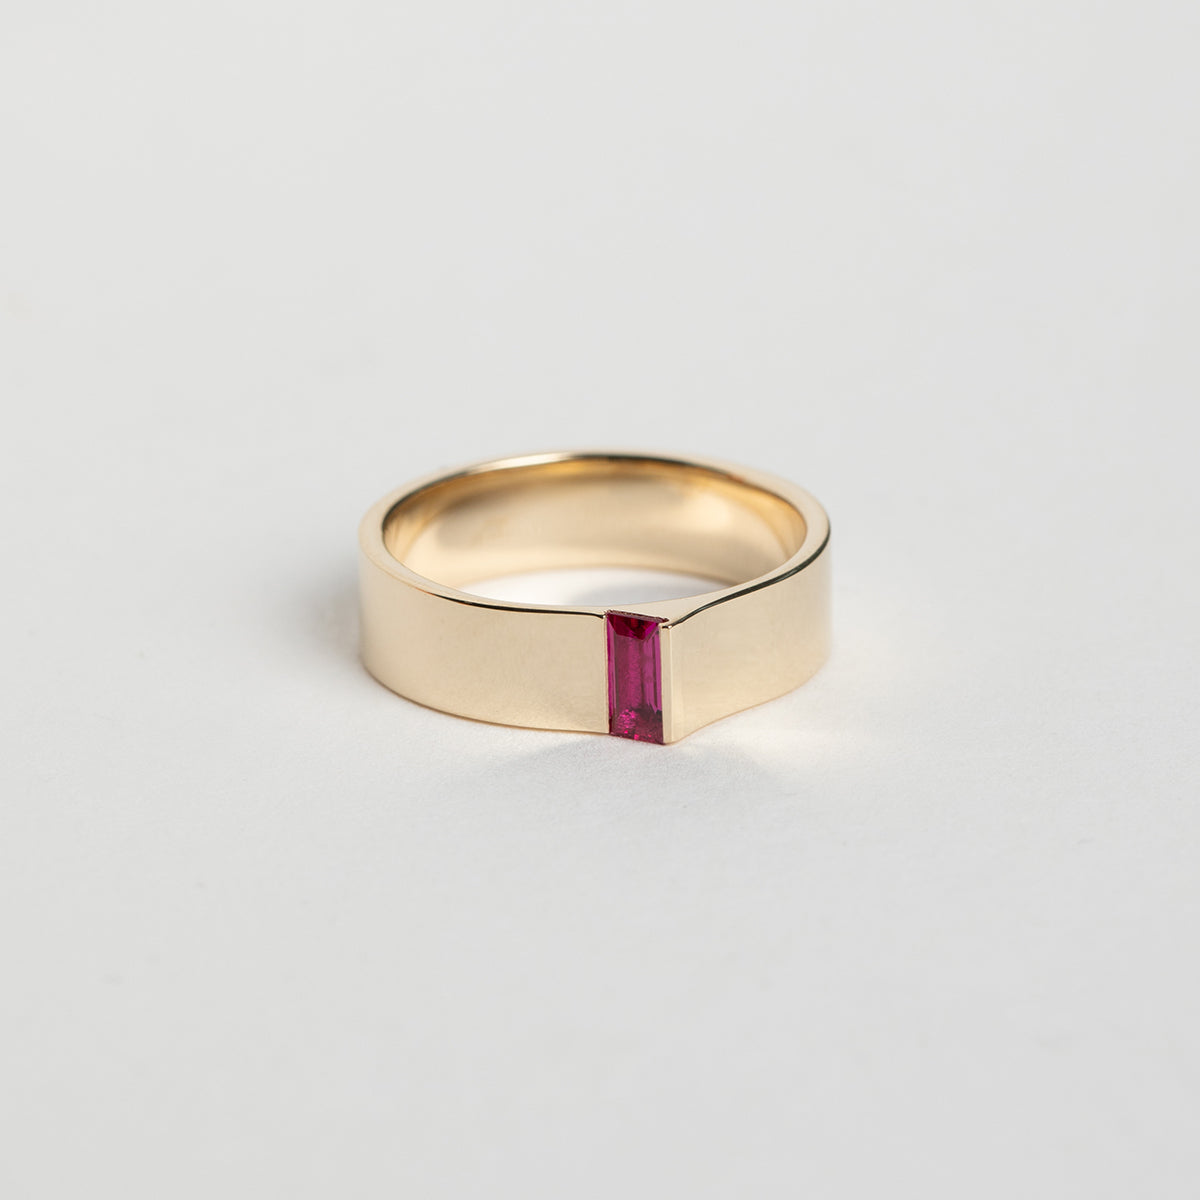 Designer Braga Ring in 14 karat yellow gold set with a baguette cut precious ruby gemstone by SHW Fine Jewelry made in NYC